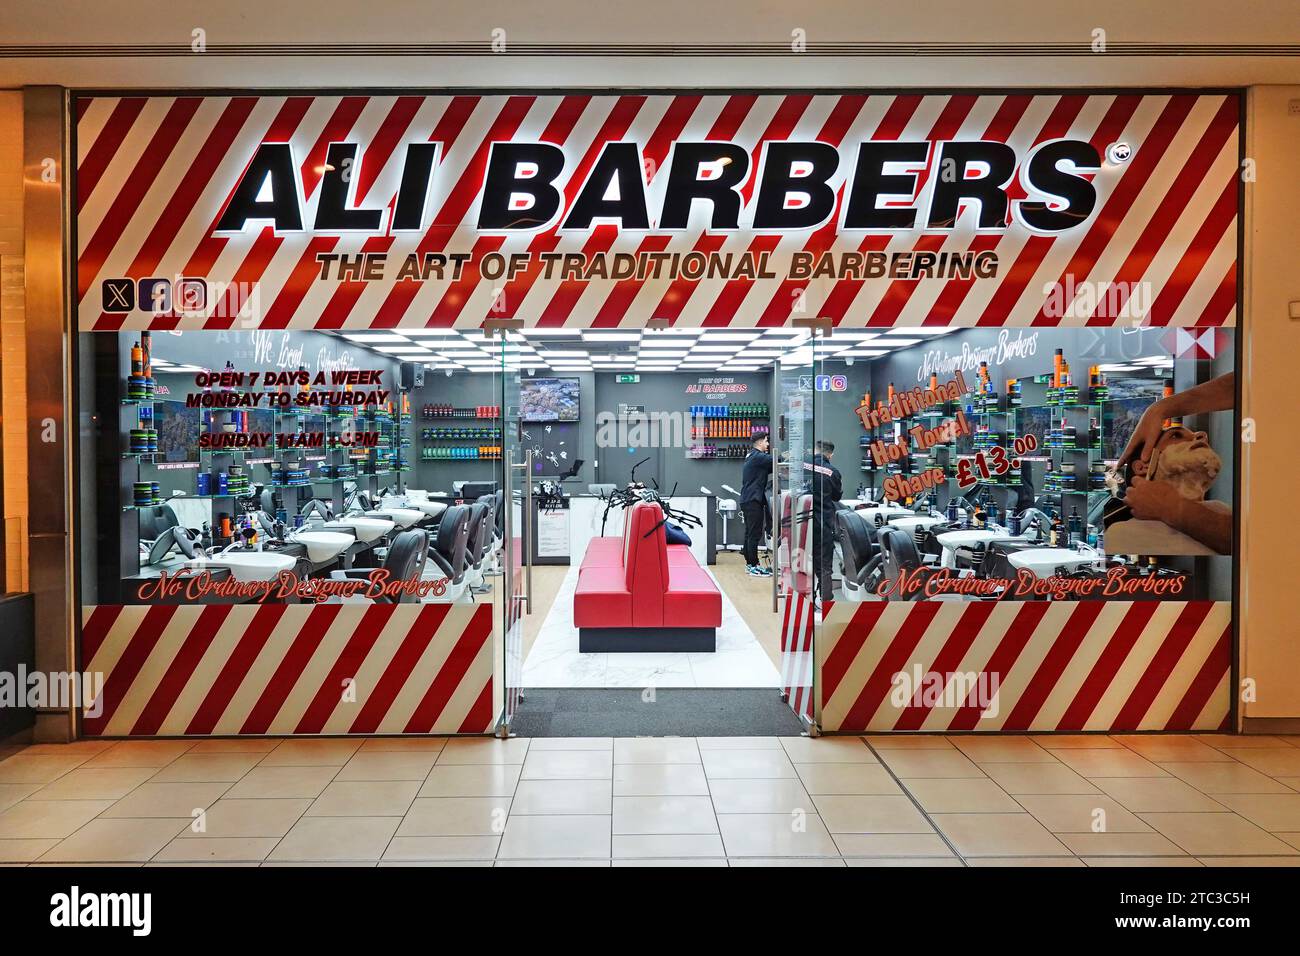 Ali Barbers 'just opened' early morning view into shop front windows new fully equipped barber business premises indoor shopping mail Essex England UK Stock Photo